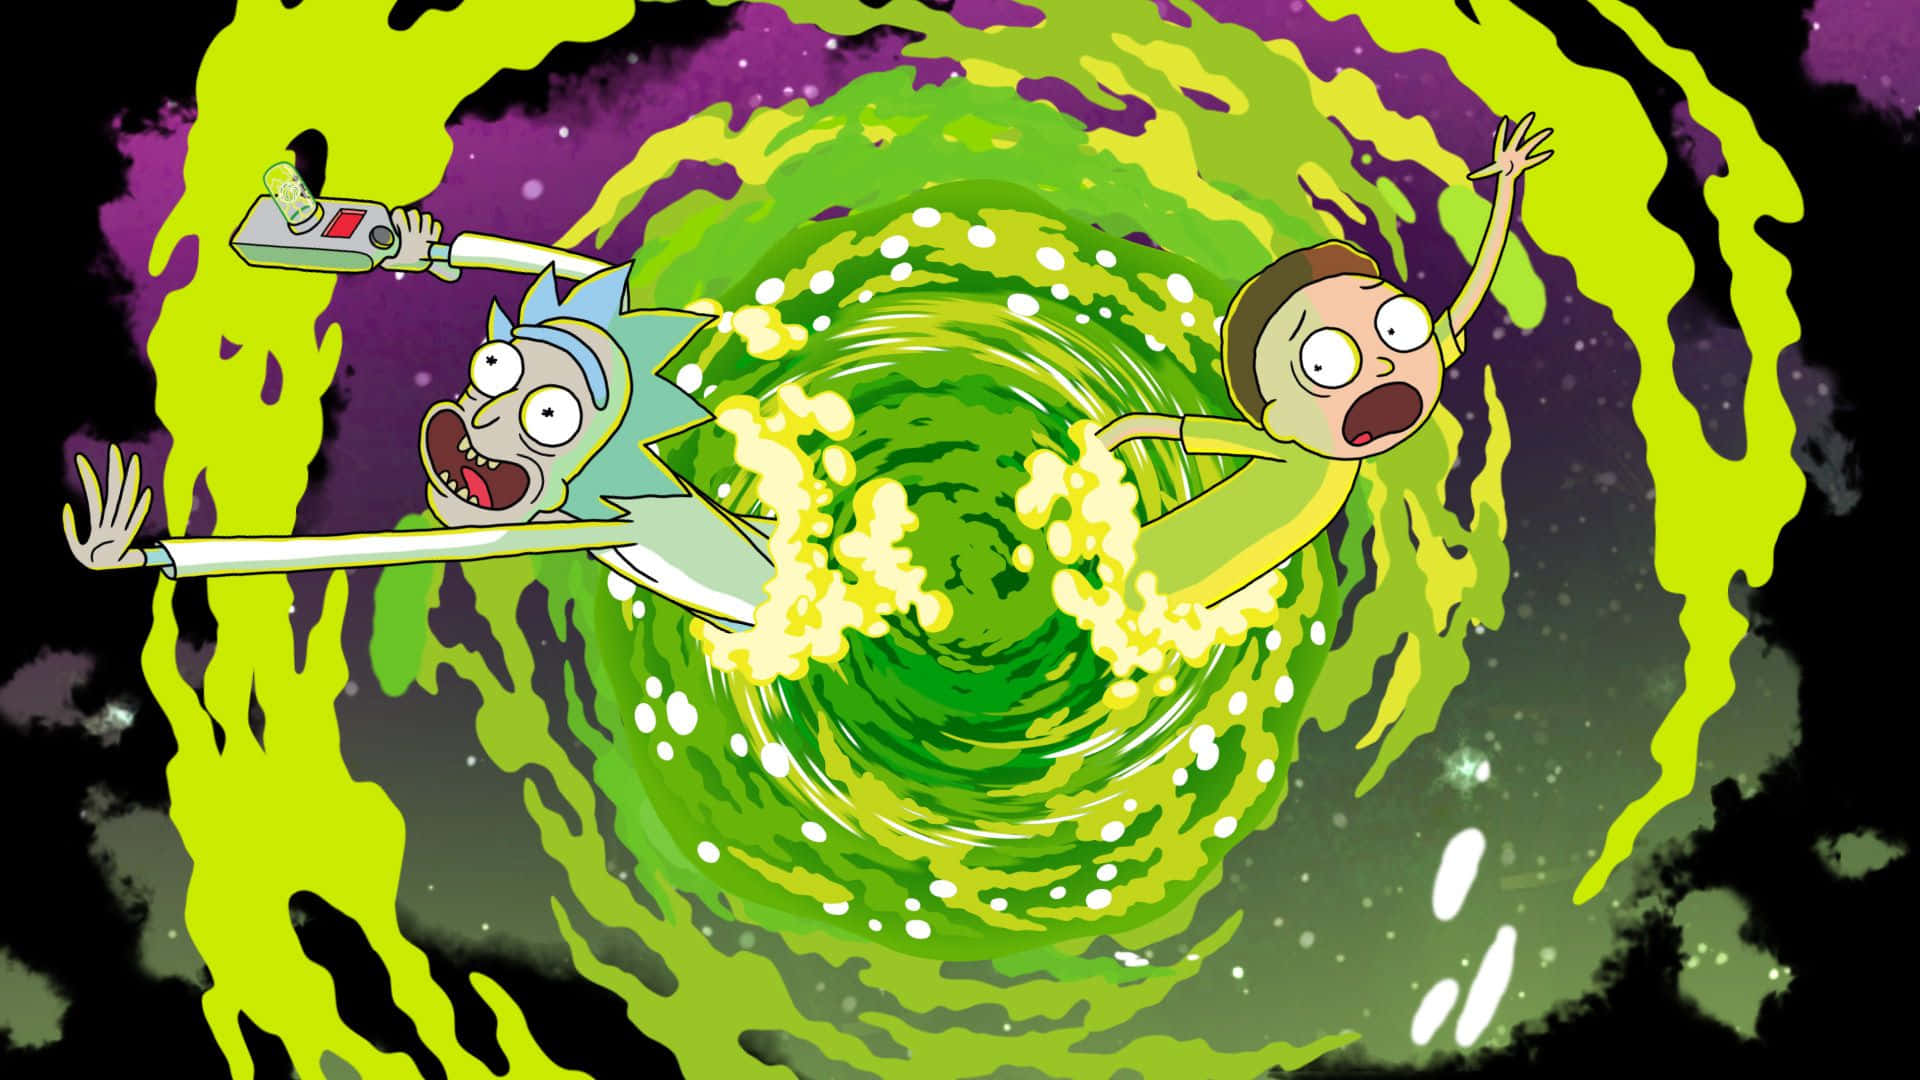 3840x2160] Rick and Morty in a Portal : r/wallpaper, rick and